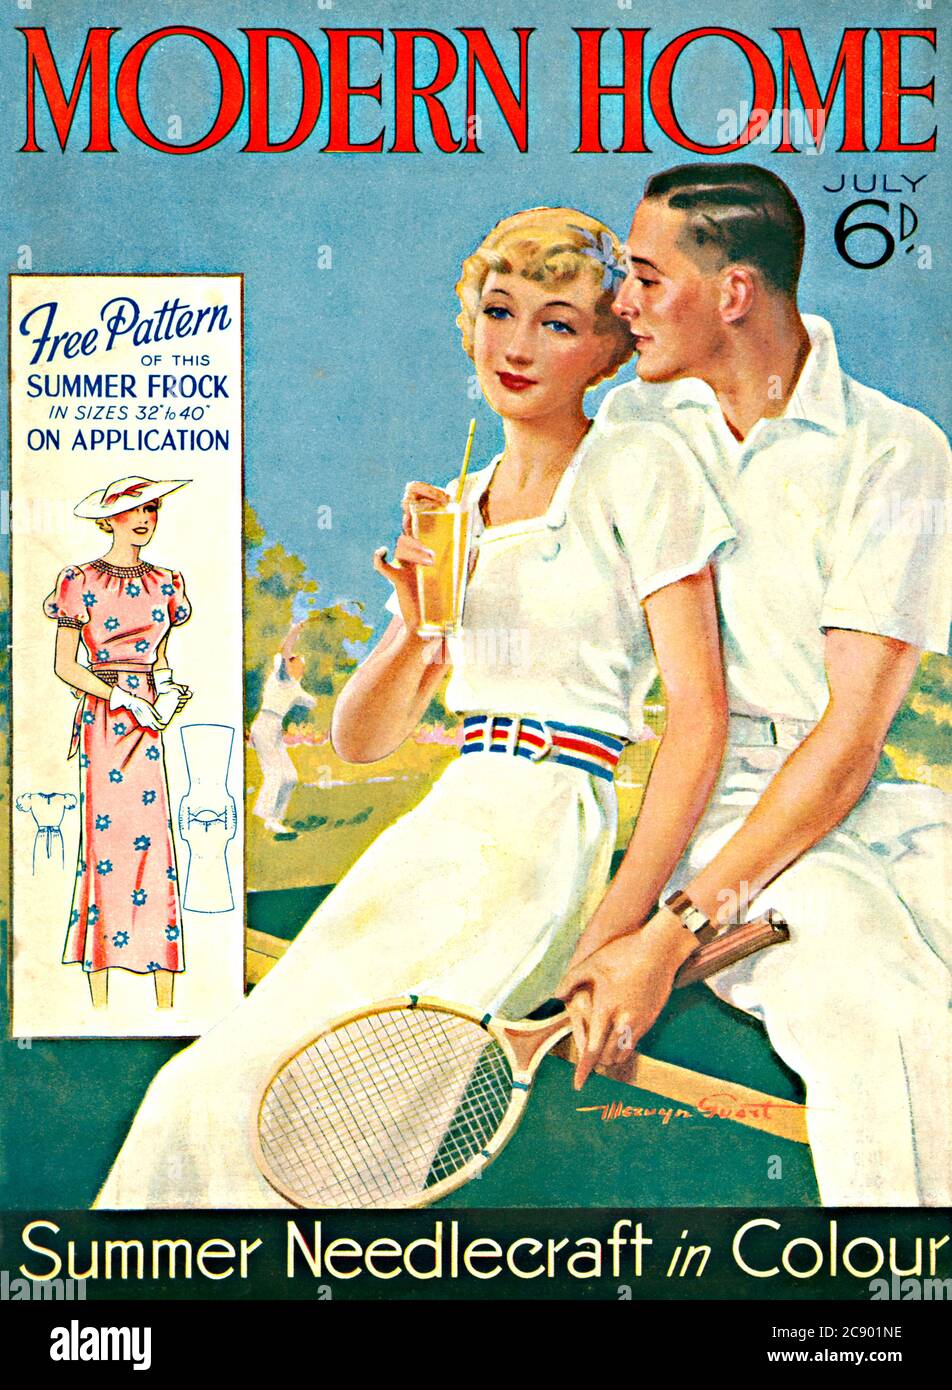 Modern Home, Tennis, 1936 cover of the monthly home magazine, with a free pattern for a summer frock and needlecraft in colour Stock Photo